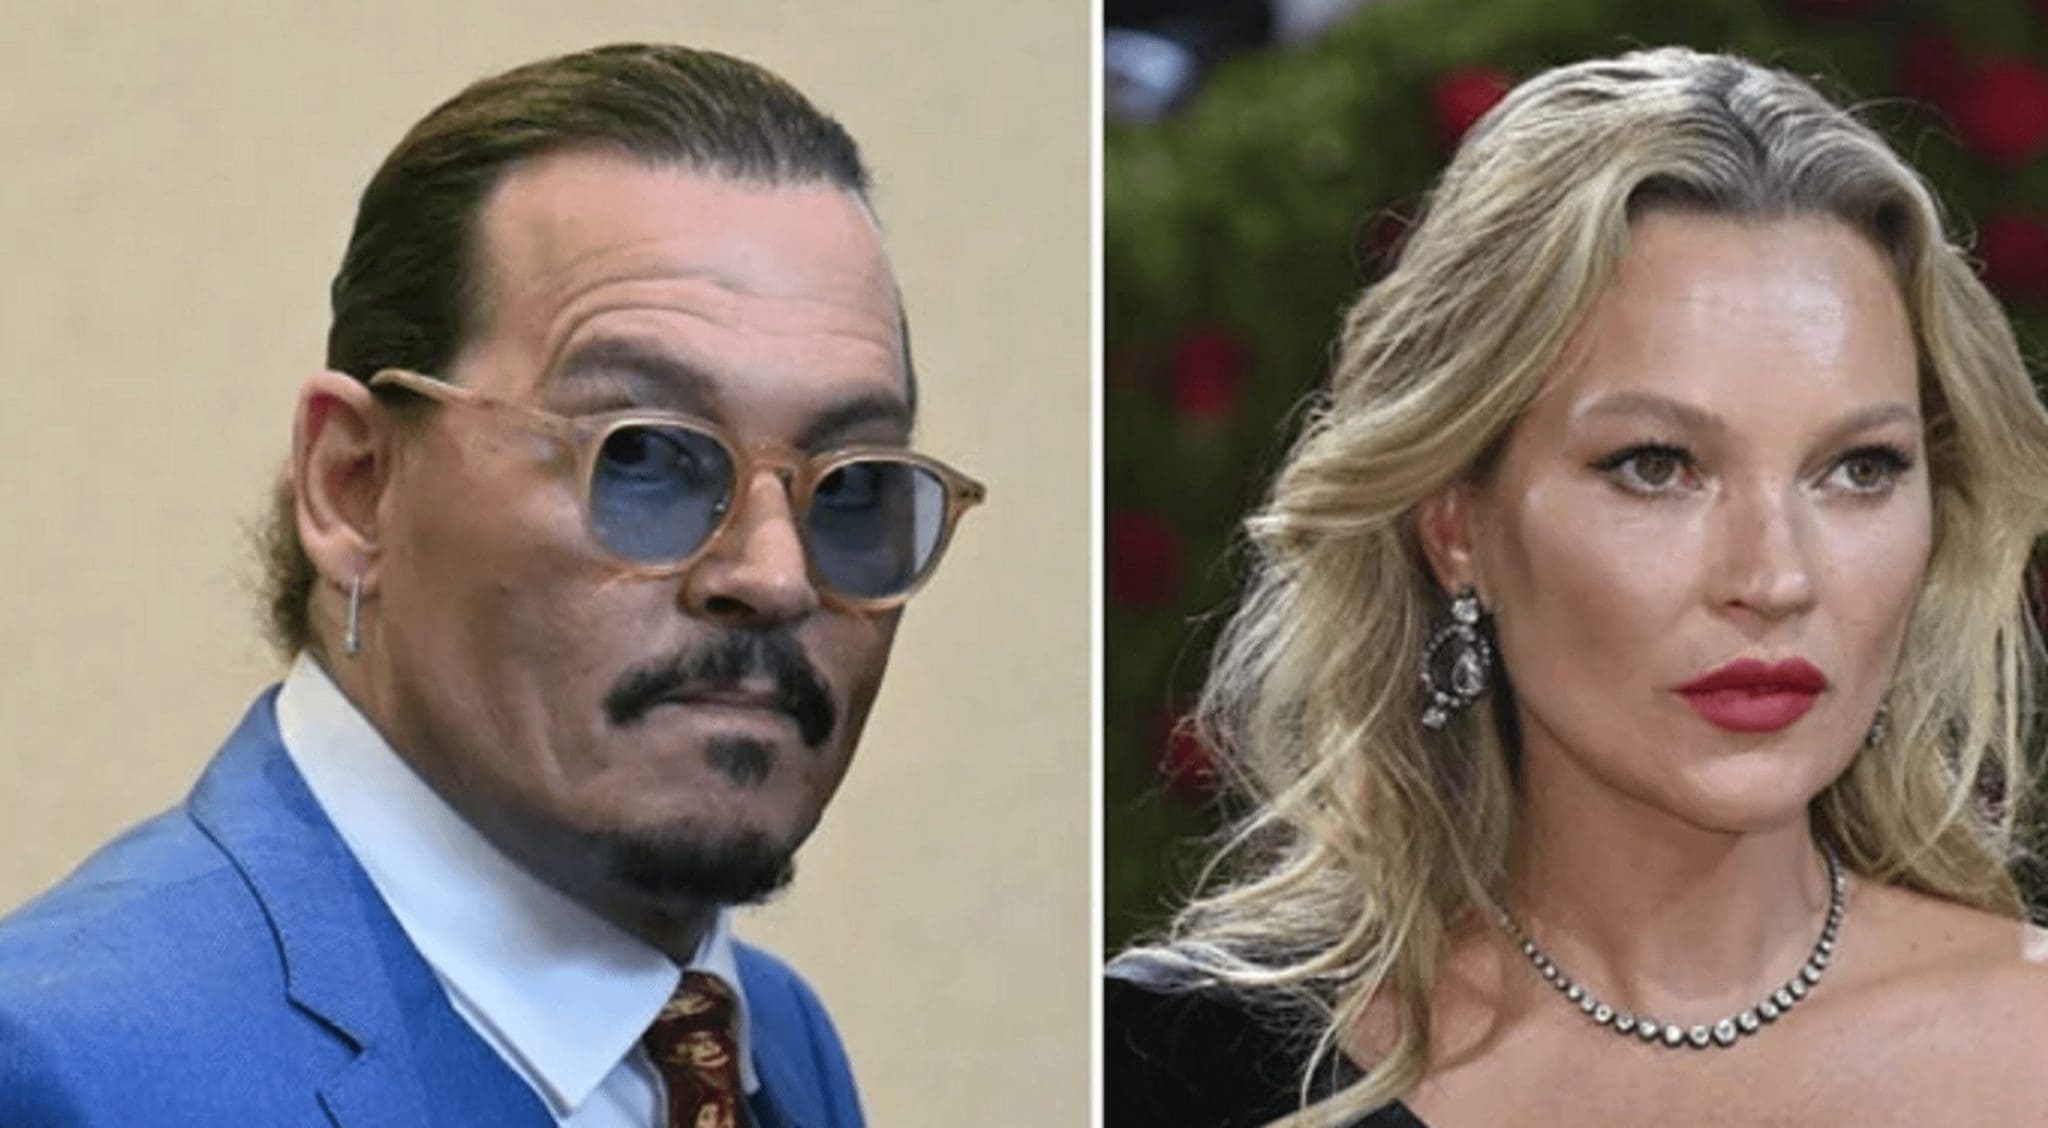 Fans have no doubt that Johnny Depp and Kate Moss will reunite after a scandalous trial